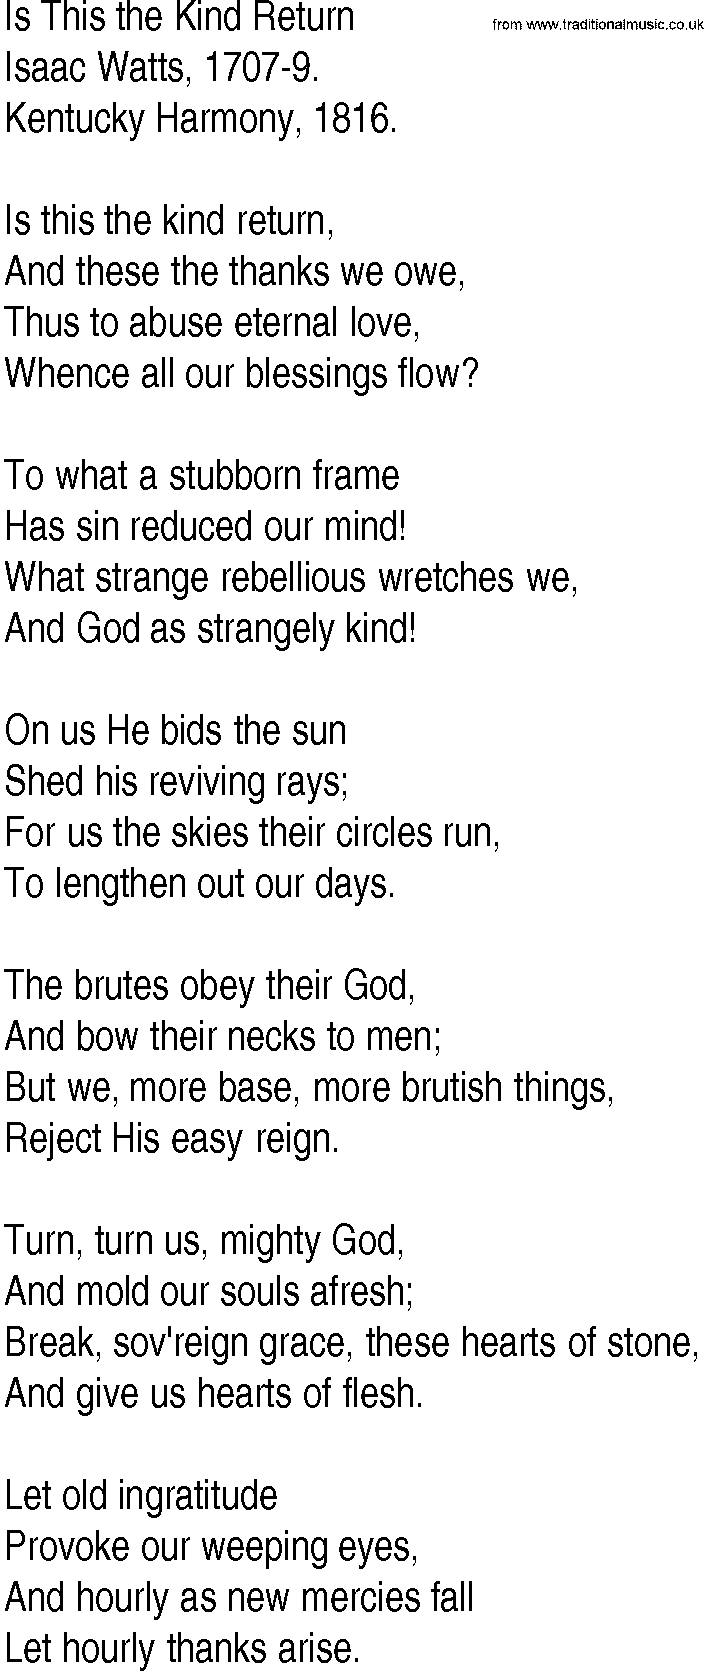 Hymn and Gospel Song: Is This the Kind Return by Isaac Watts lyrics